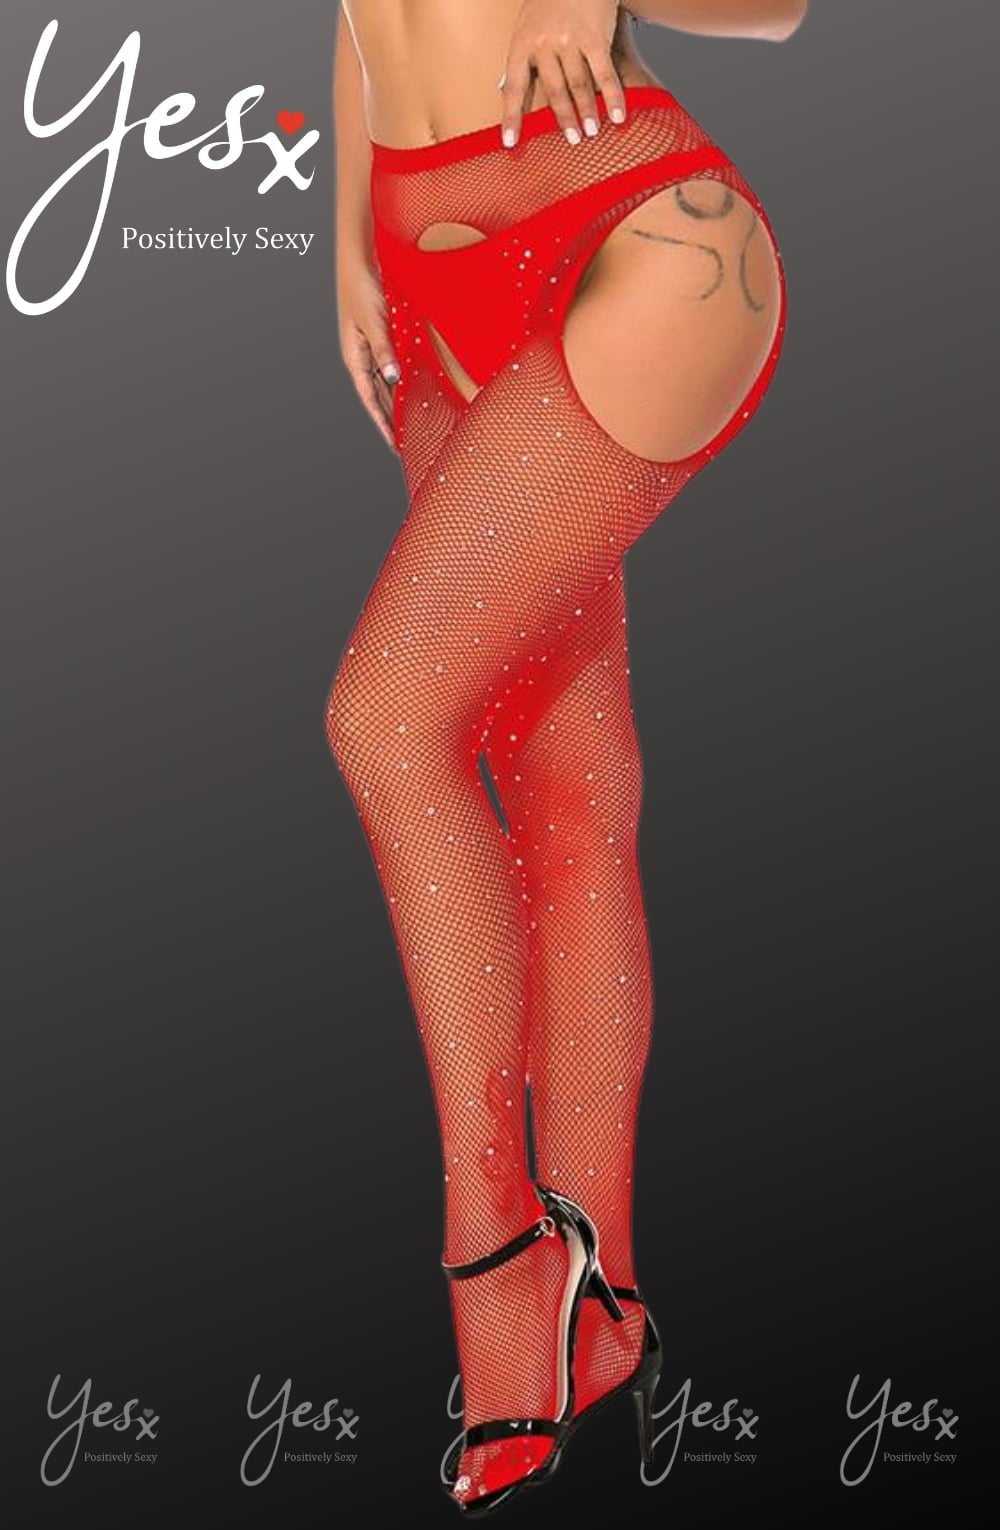 Sparkly red fishnet stockings from YesX in a provocative pose, highlighting their alluring and seductive design.